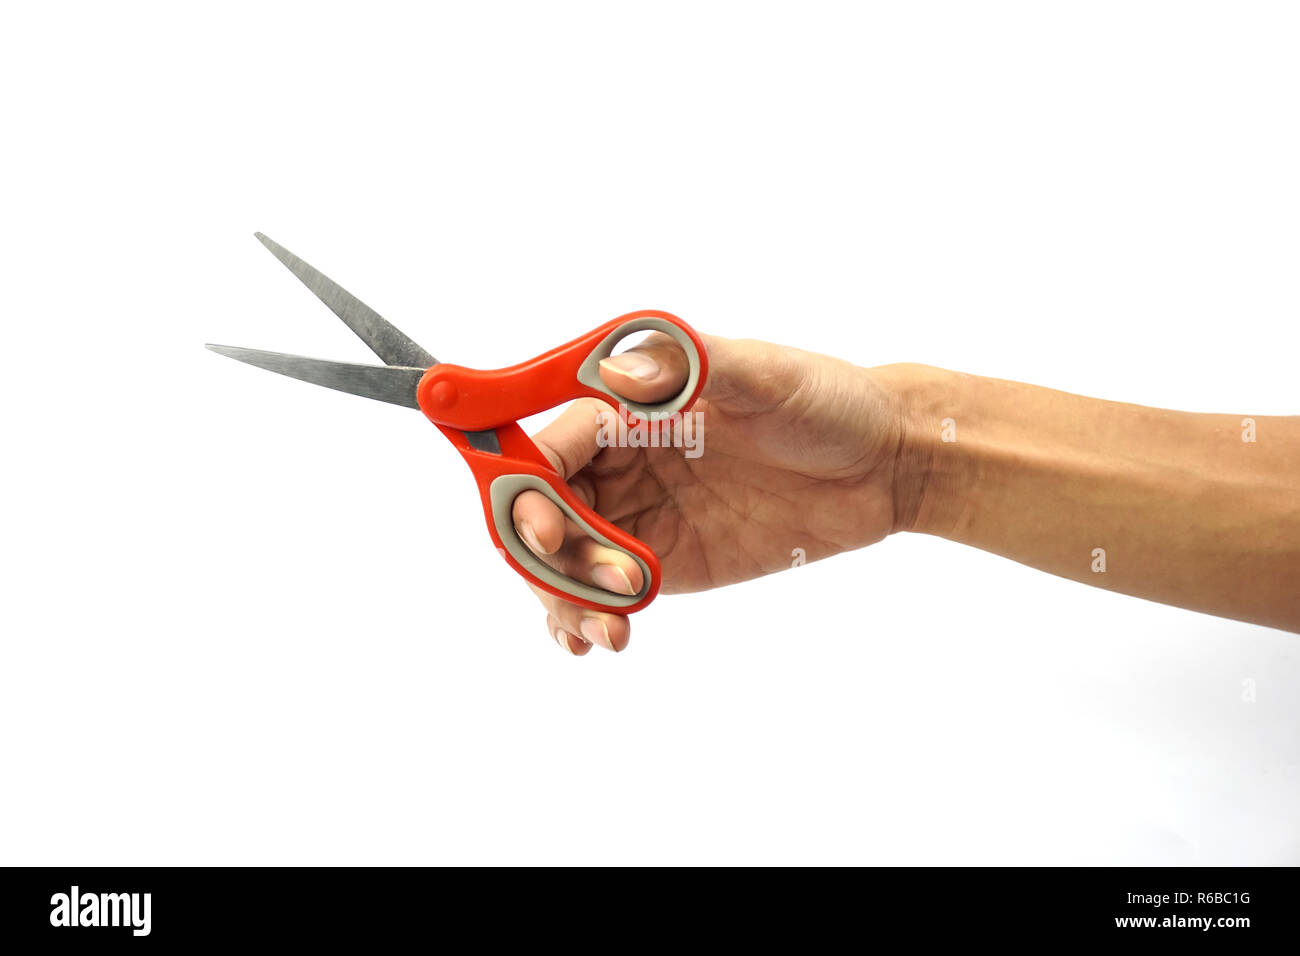 A Cropped of man hand holding red metal scissors against white background. Stock Photo